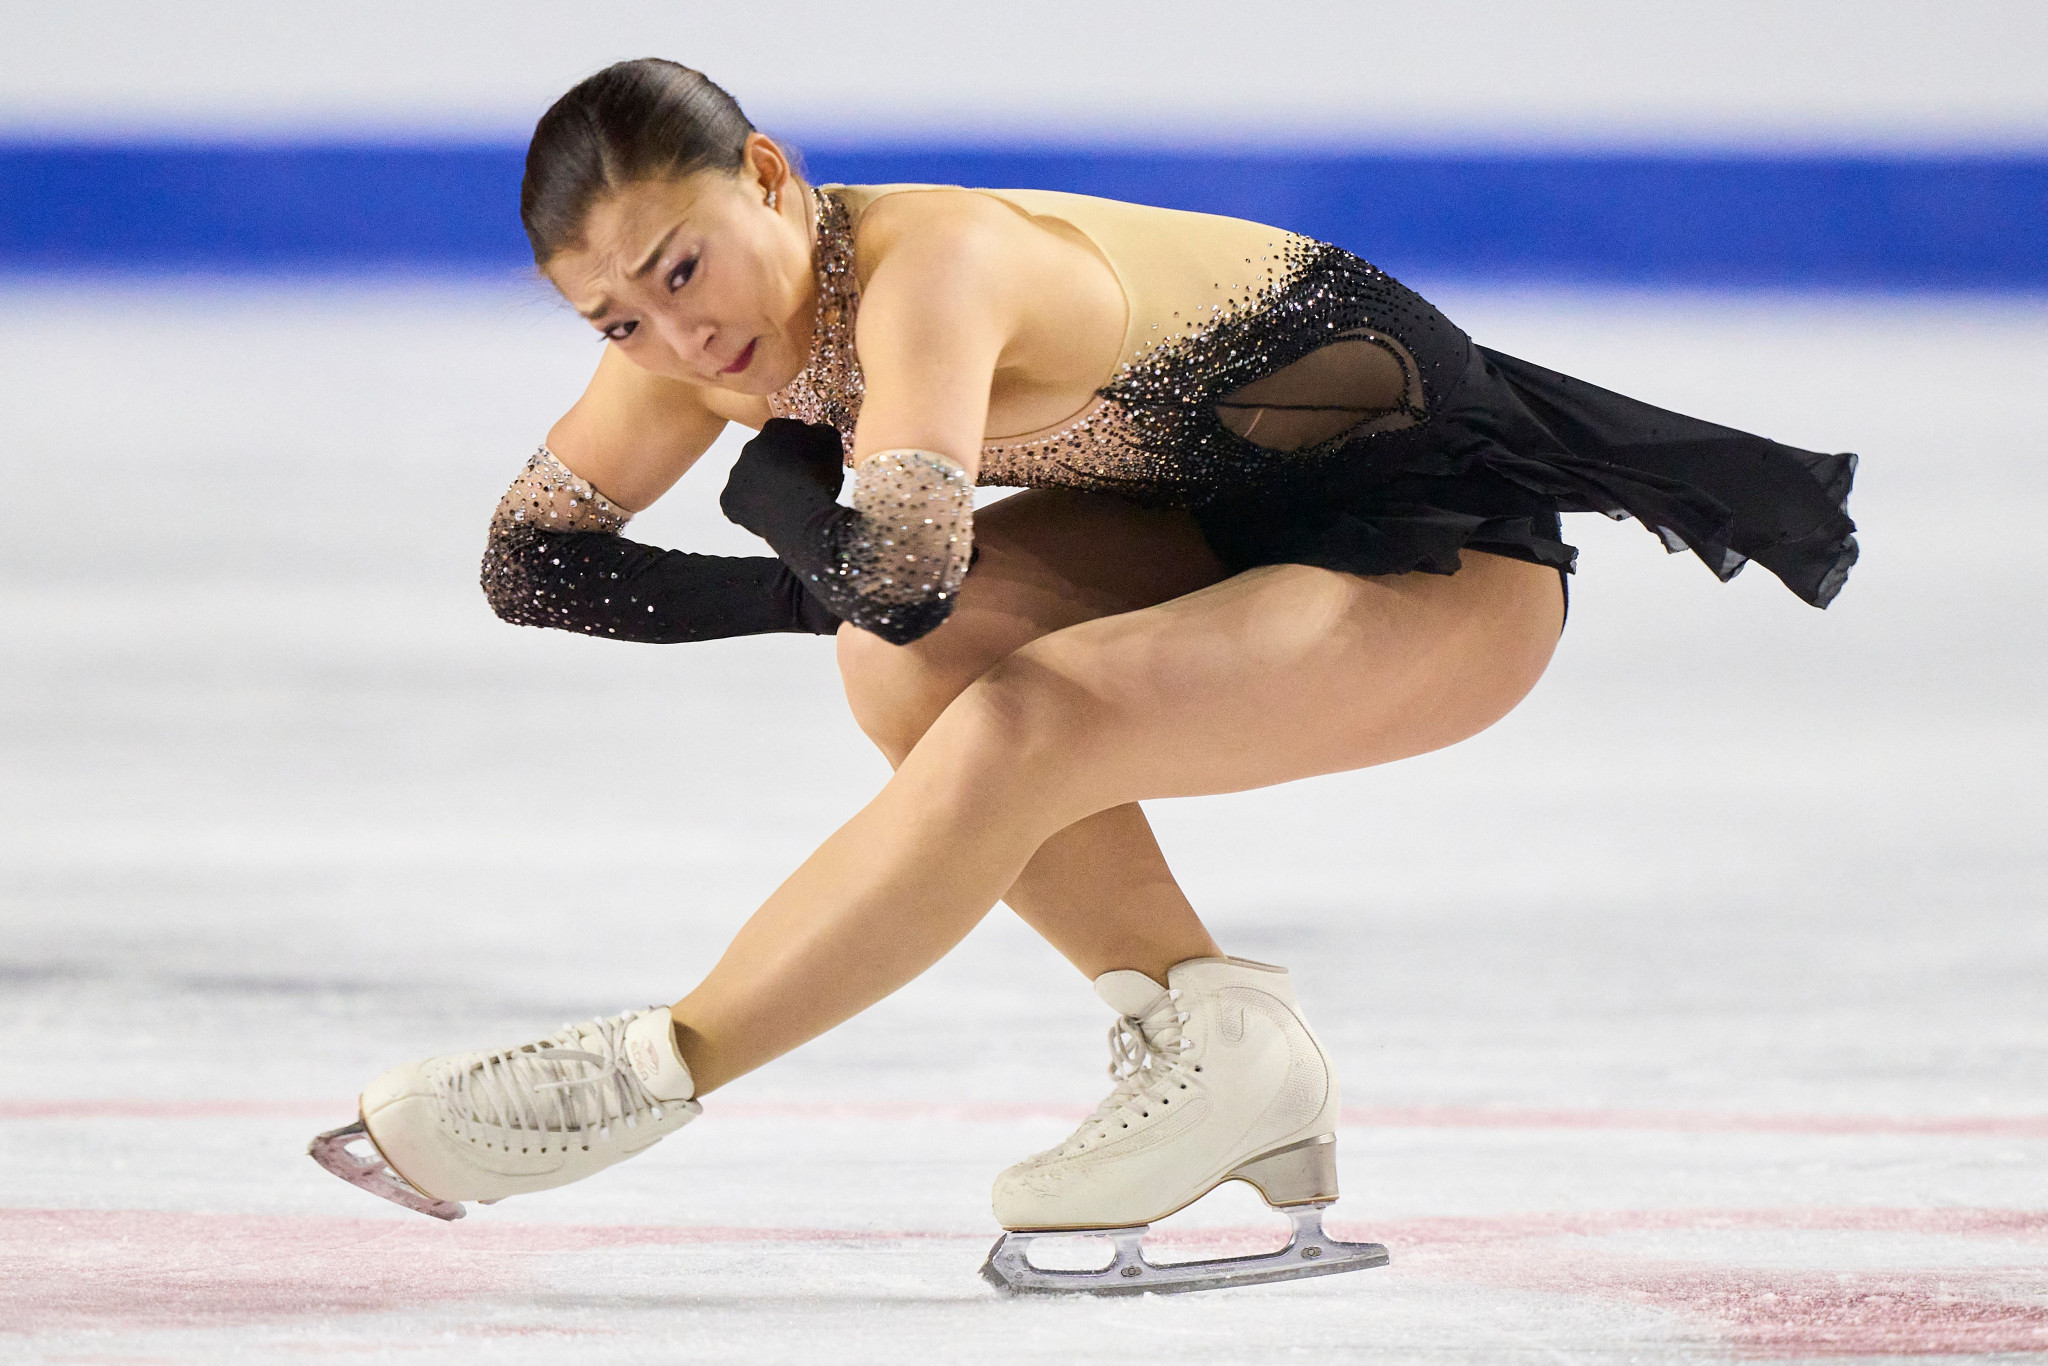 Kaori Sakamoto took the Skate Canada International women's title in commanding fashion with 226.13 points ©Getty Images